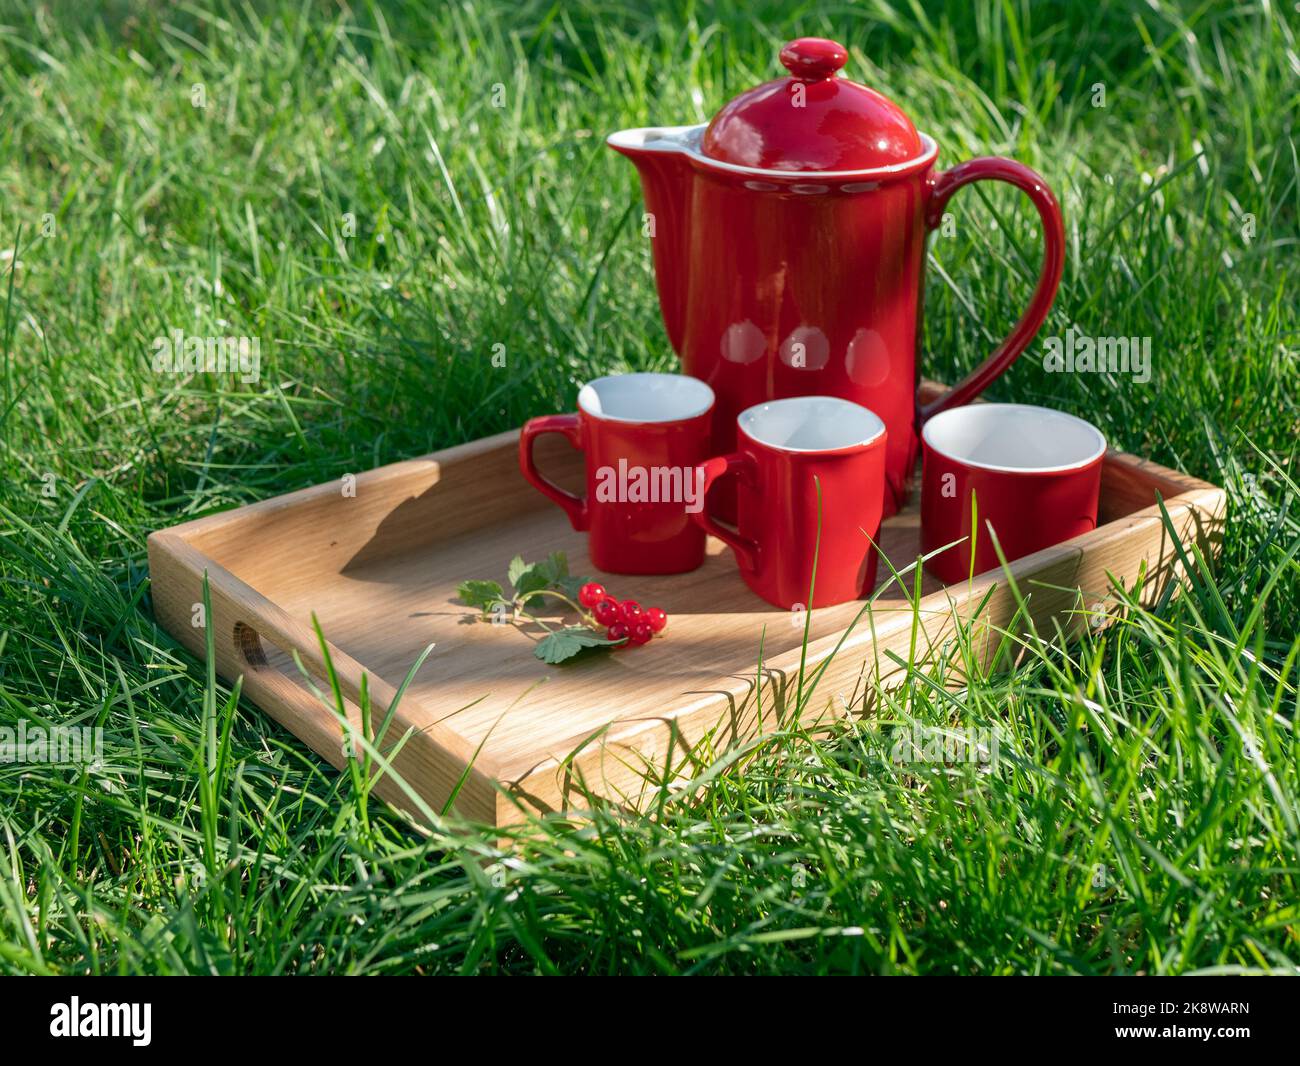 Summer picnic with red jug for fruit drink, cups and fresh red currant on the wooden tray, selective focus Stock Photo